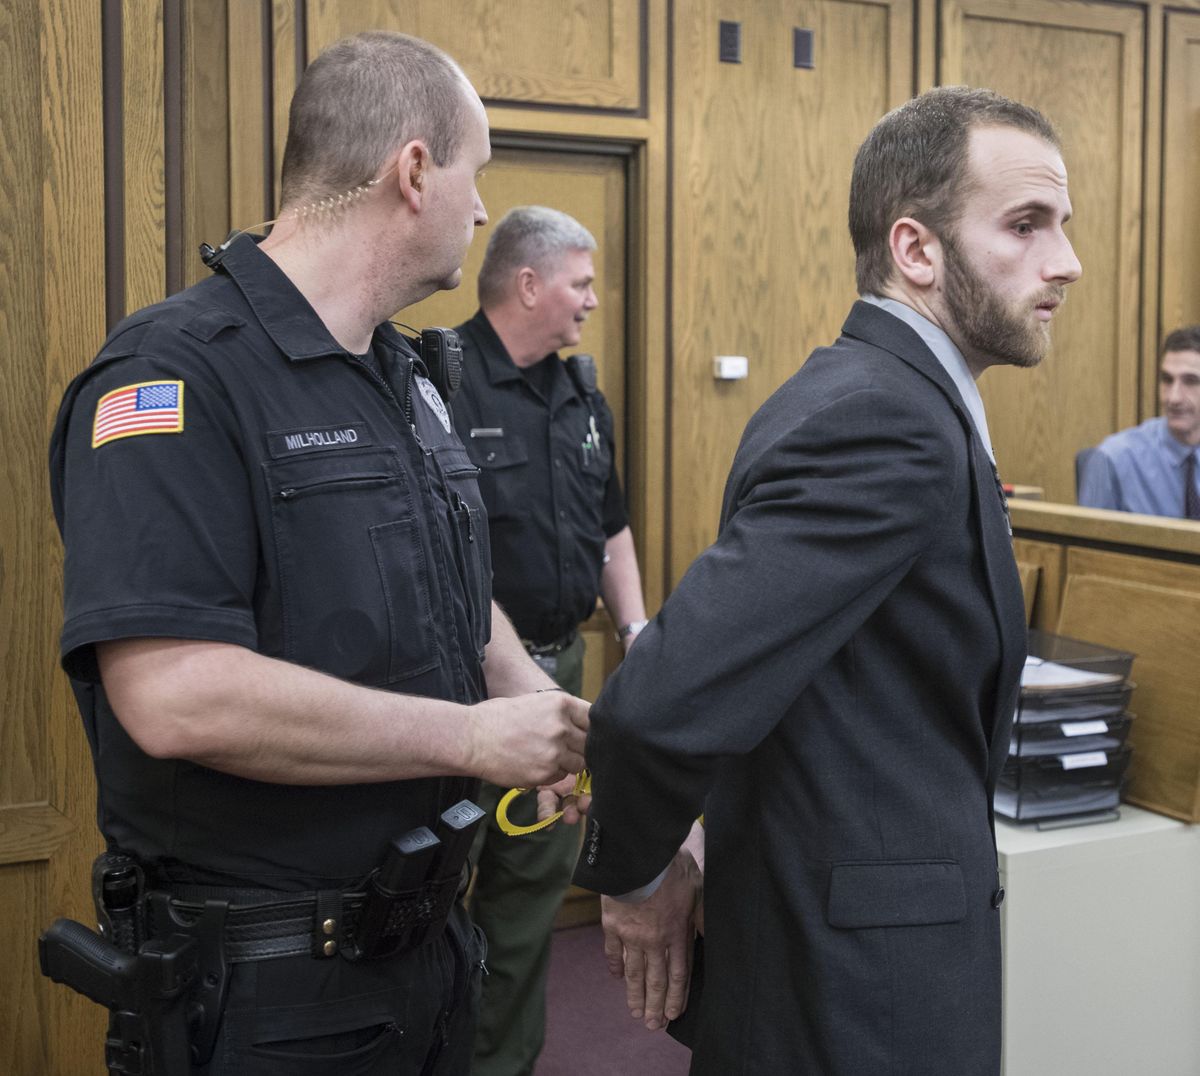 John T. Mellgren, 26, who was convicted of attempted first-degree murder, enters court, April 13, 2017, in Spokane. He was convicted of using a baseball bat to beat Robert “Drew” Schreiber, 22, a former student at Eastern Washington University and a member of the track team. Appellate judges dismissed the attempted murder conviction on Tuesday because of a technicality. (Dan Pelle / The Spokesman-Review)